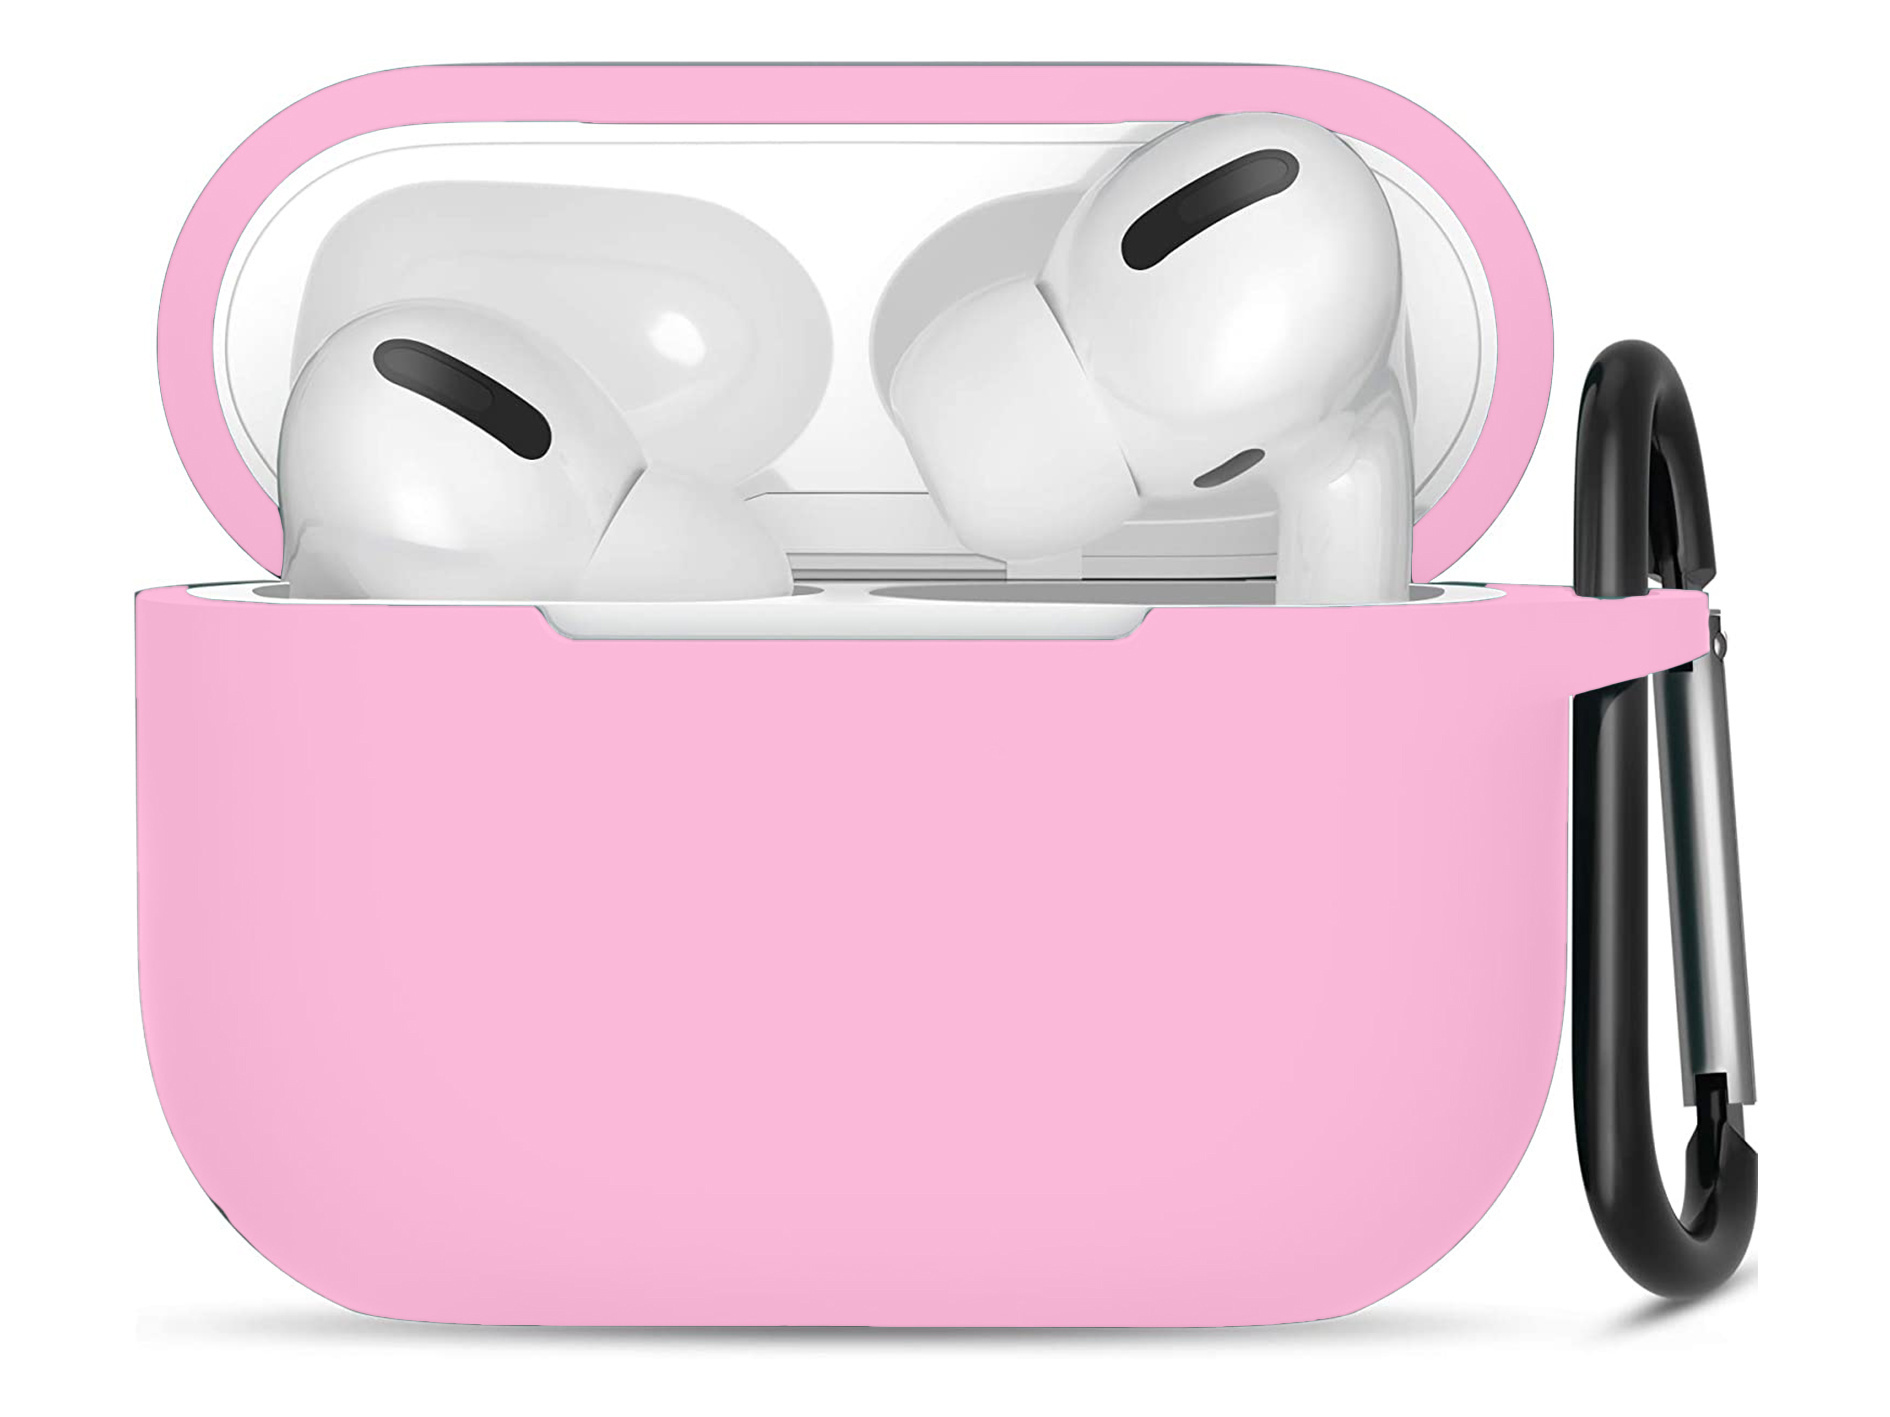 JVS Products Apple Airpods Pro ultra dunne siliconen cover - Hoesje - extra dunne Apple Airpods siliconen cover met sleutelhanger - Roze